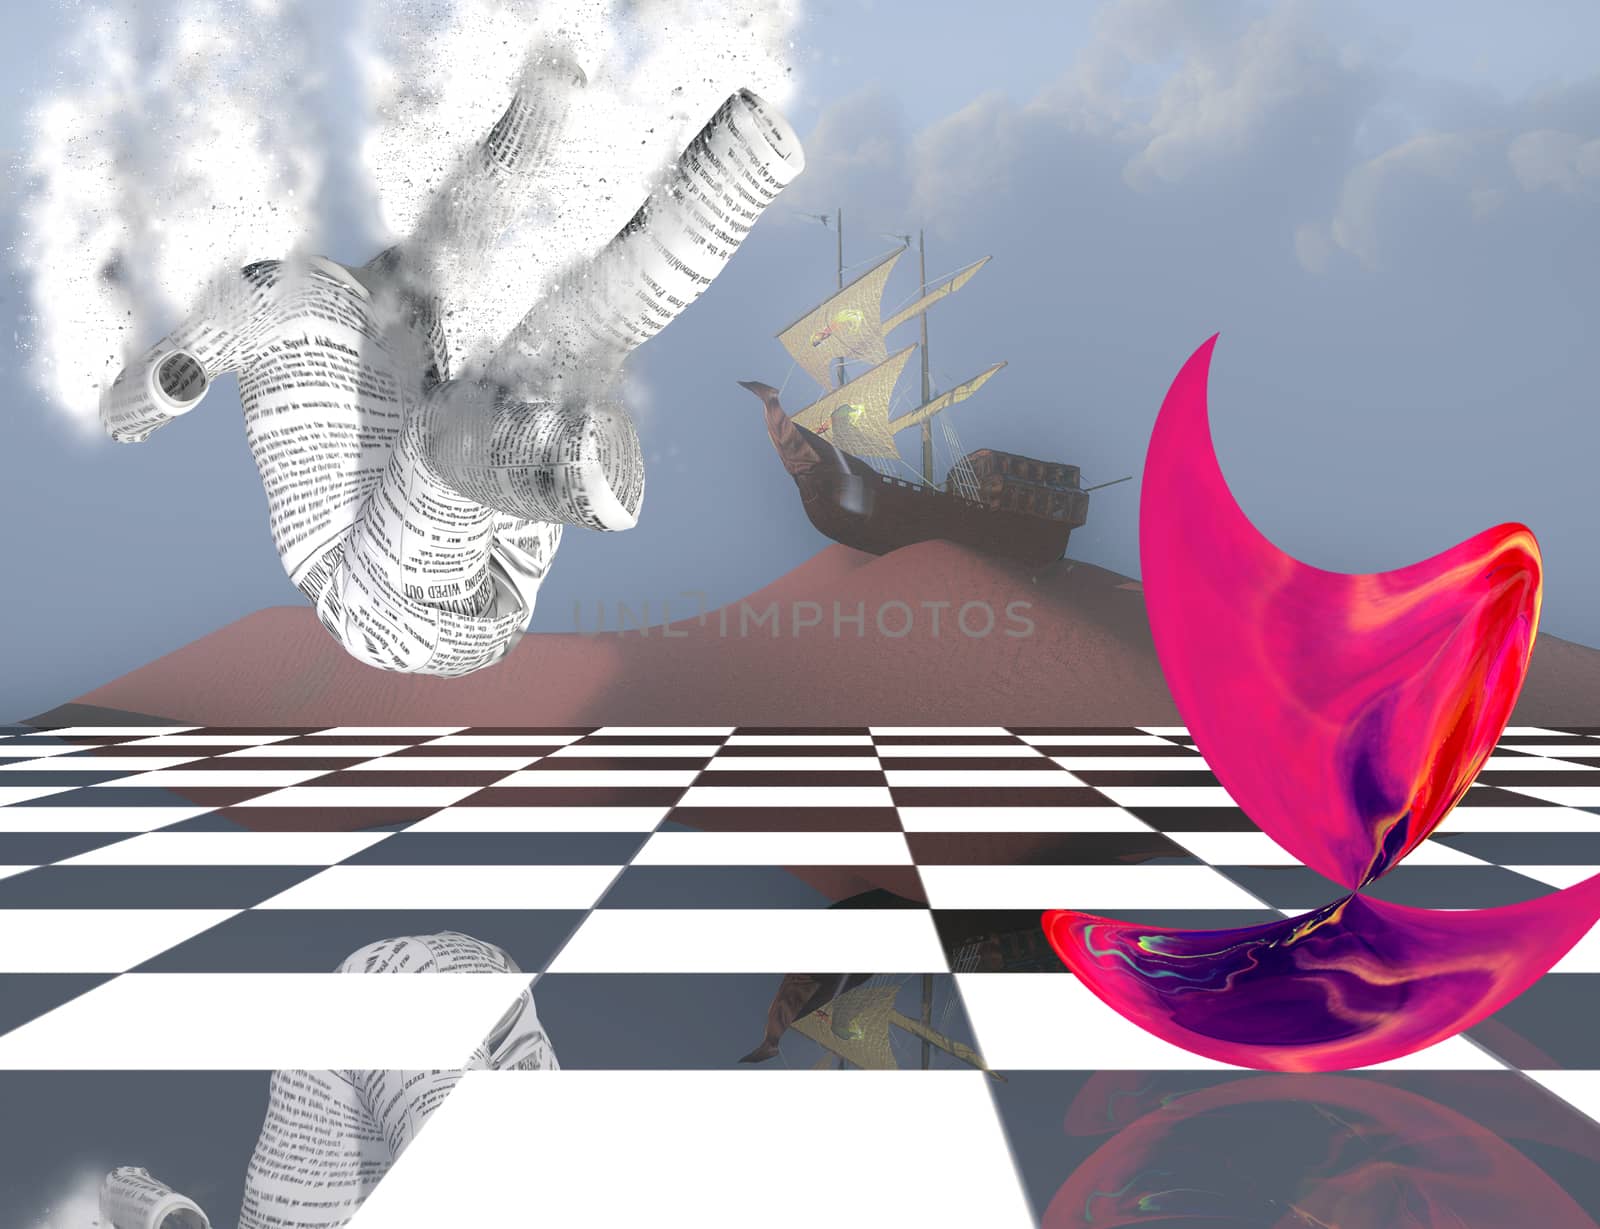 Surreal composition. Pink matter on chessboard, ancient ship on sand dune and falling paper man